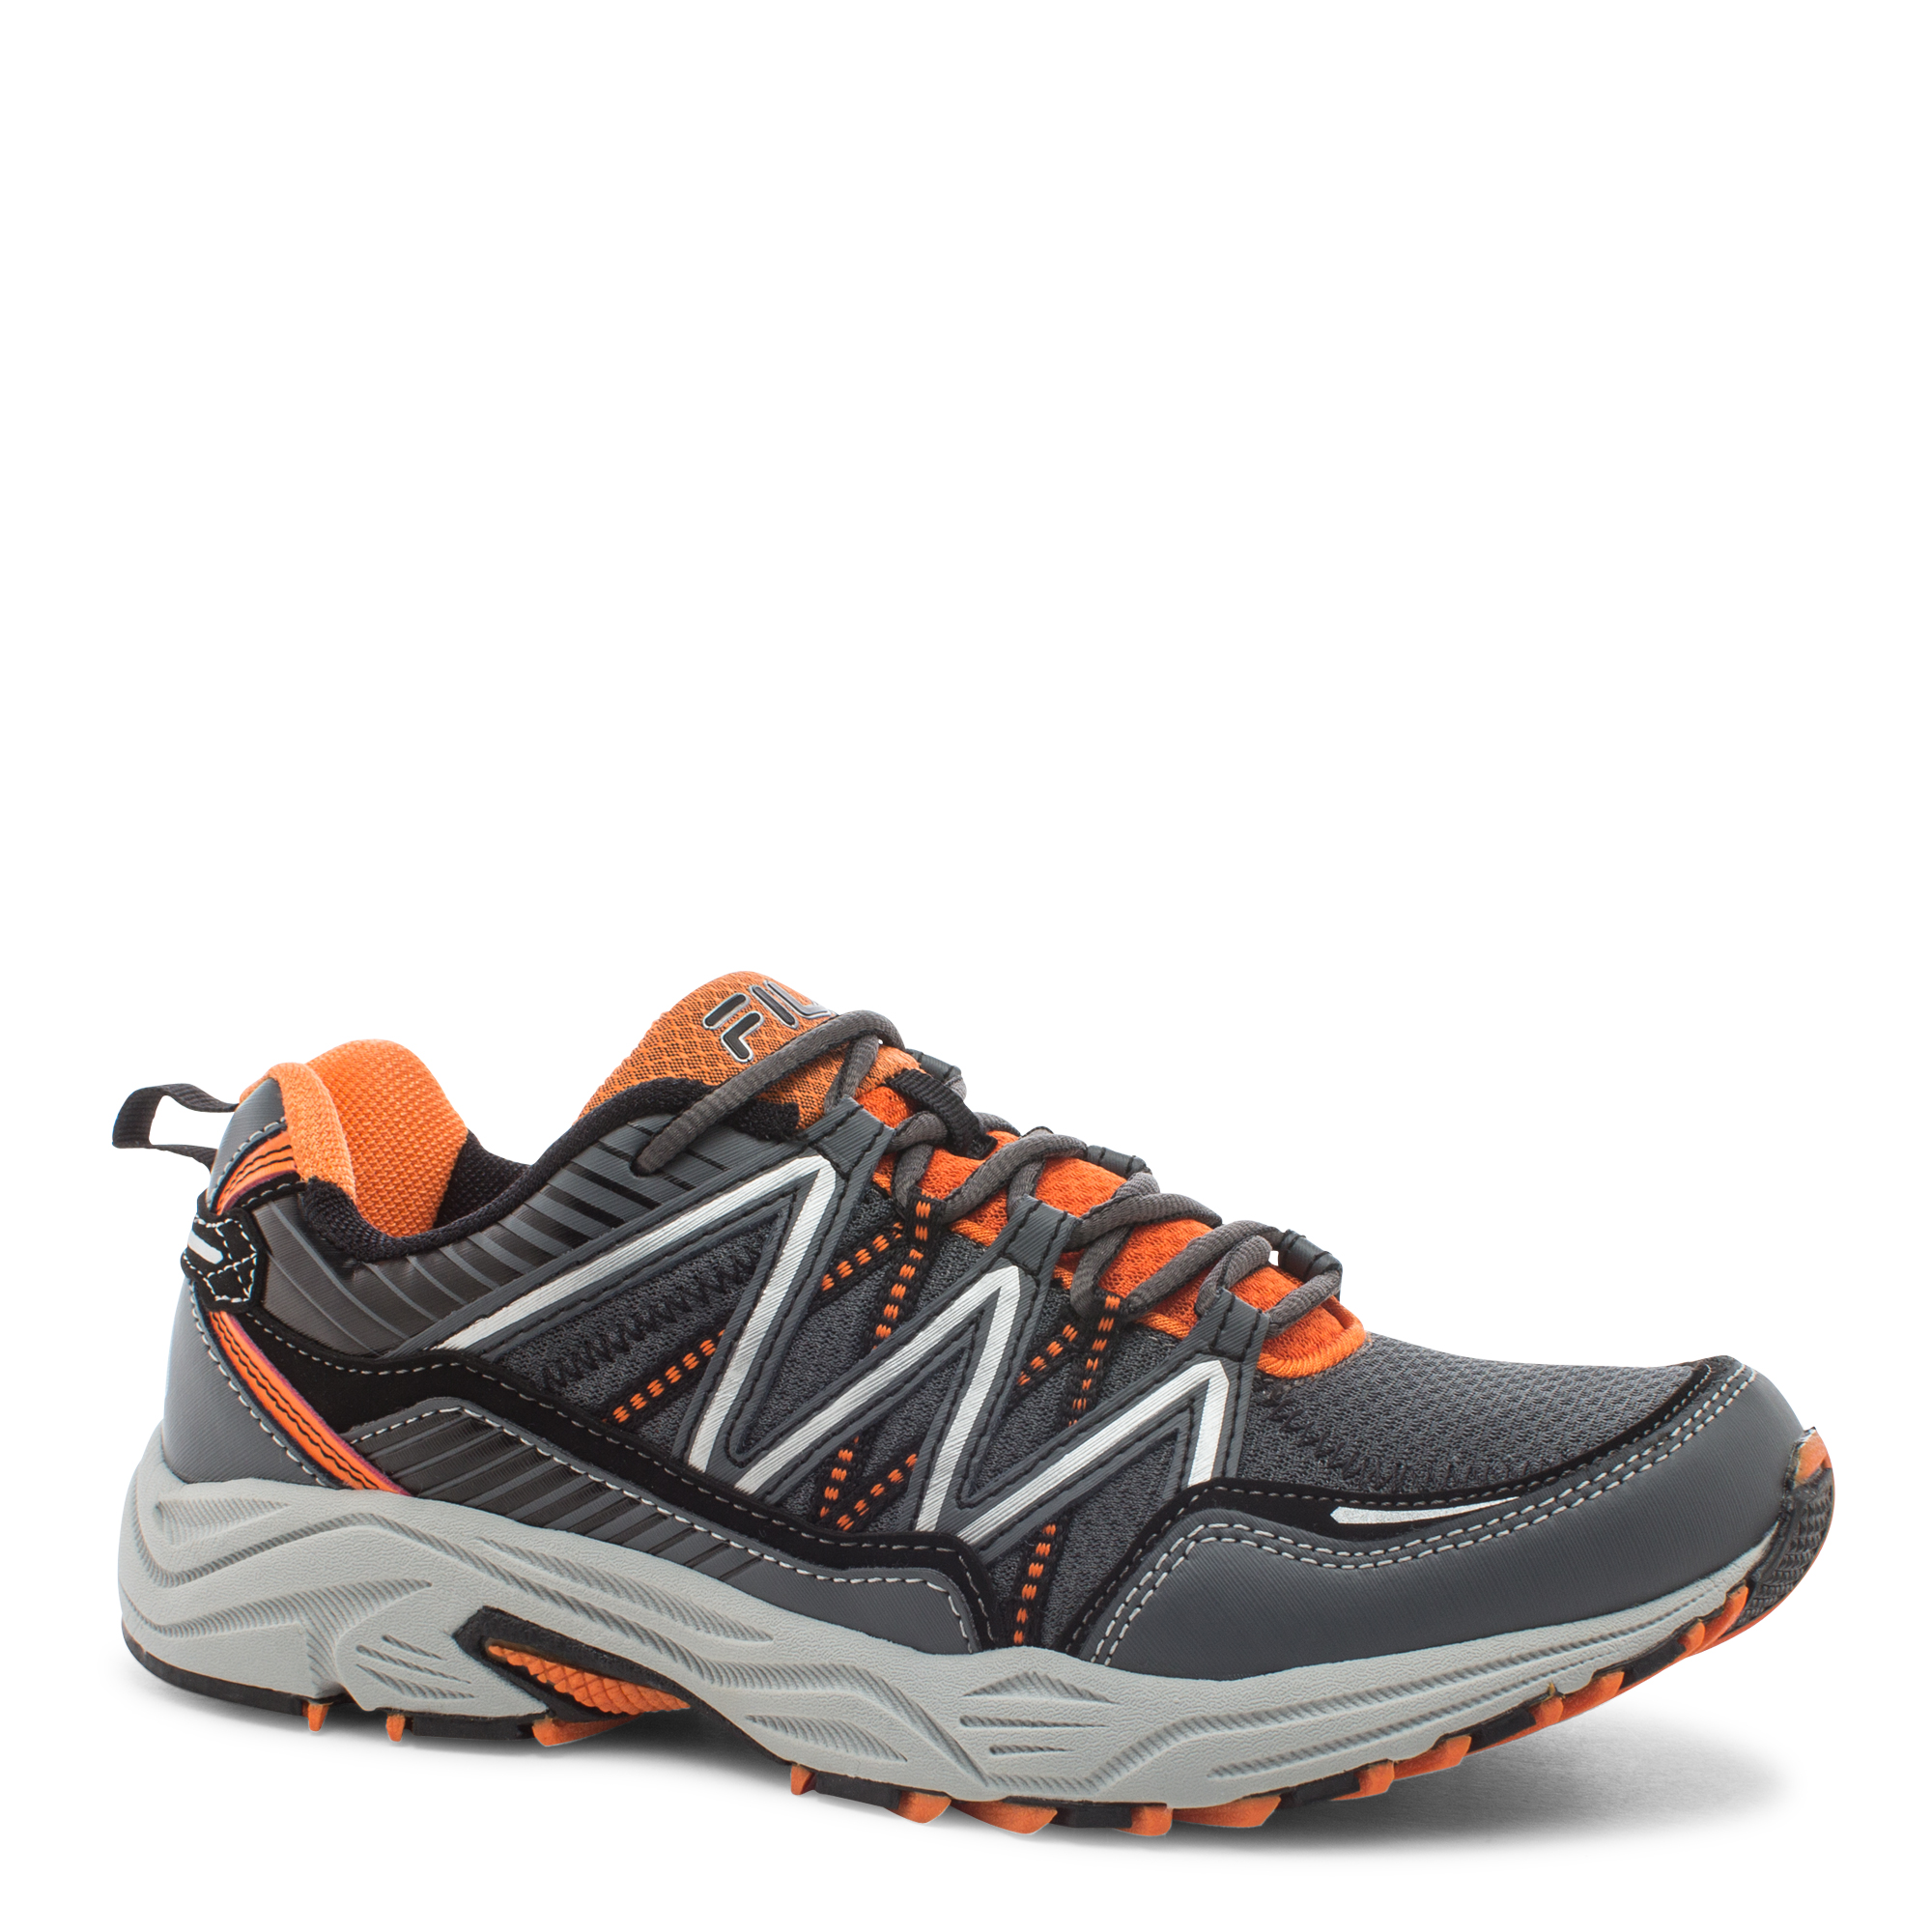 Fila men’s Headway 6 trail shoes for $22